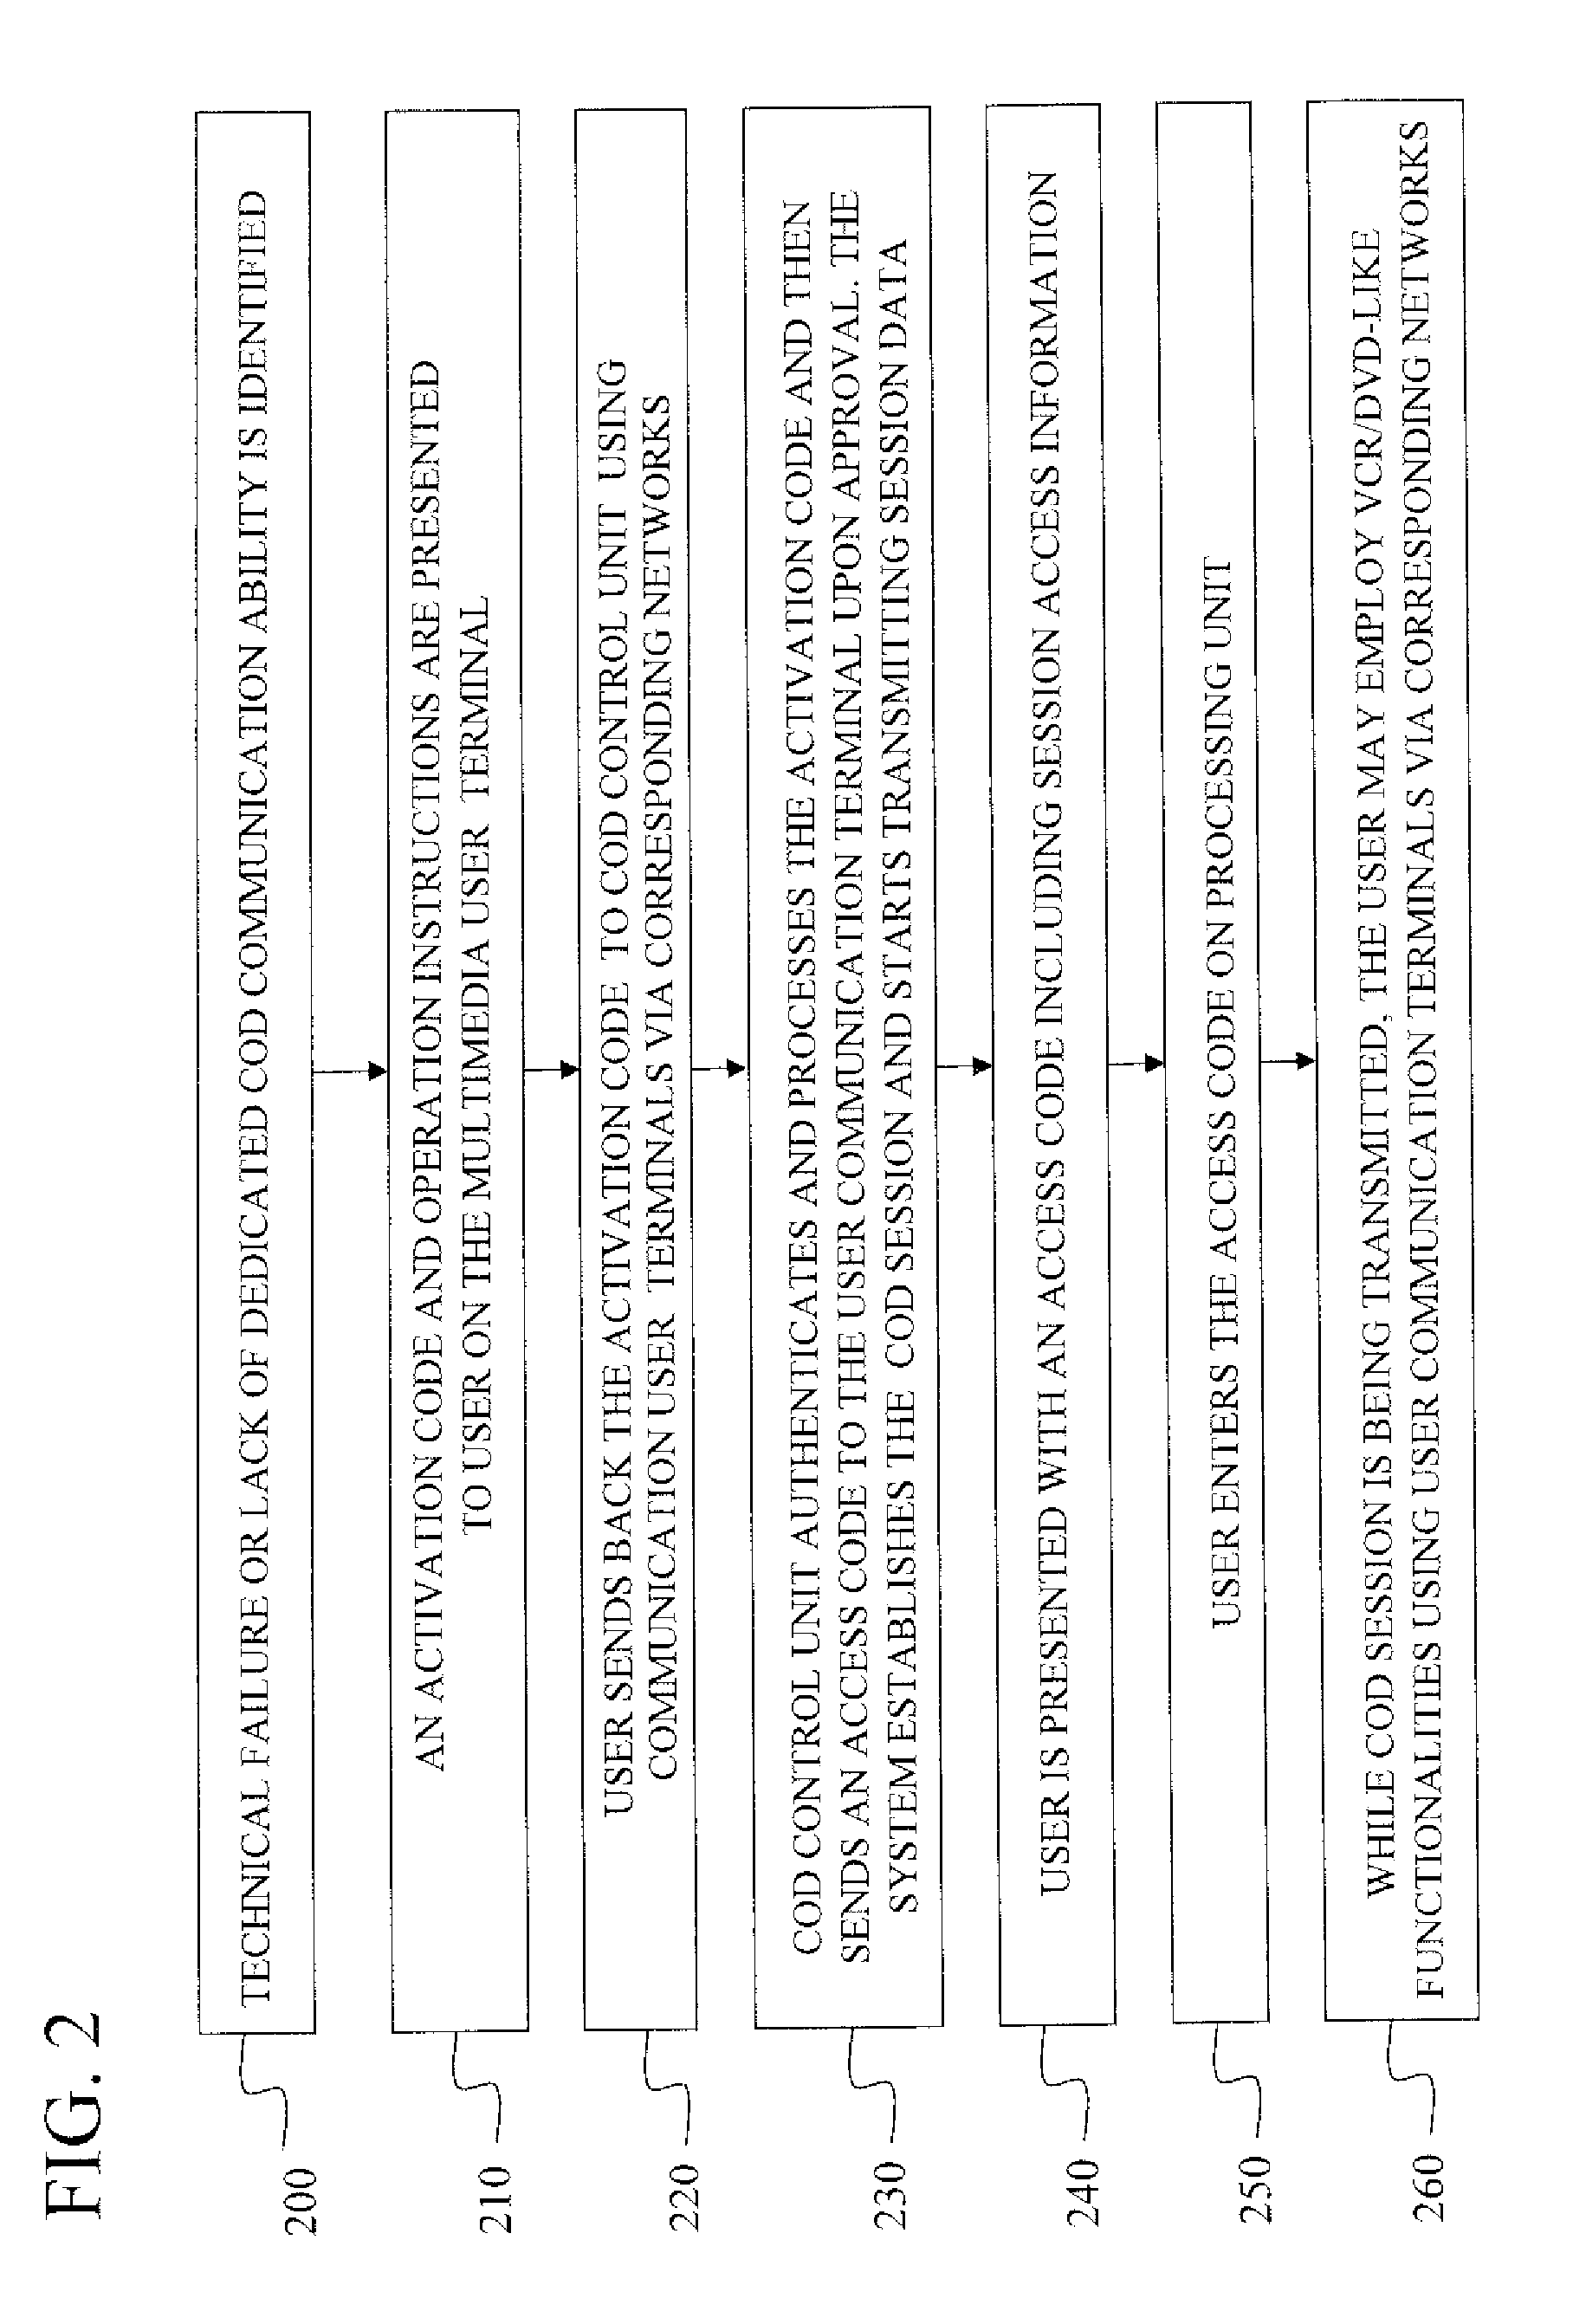 Method and system for initiating, controlling and managing a content-on-demand session via phone, mobile communication or internet based services